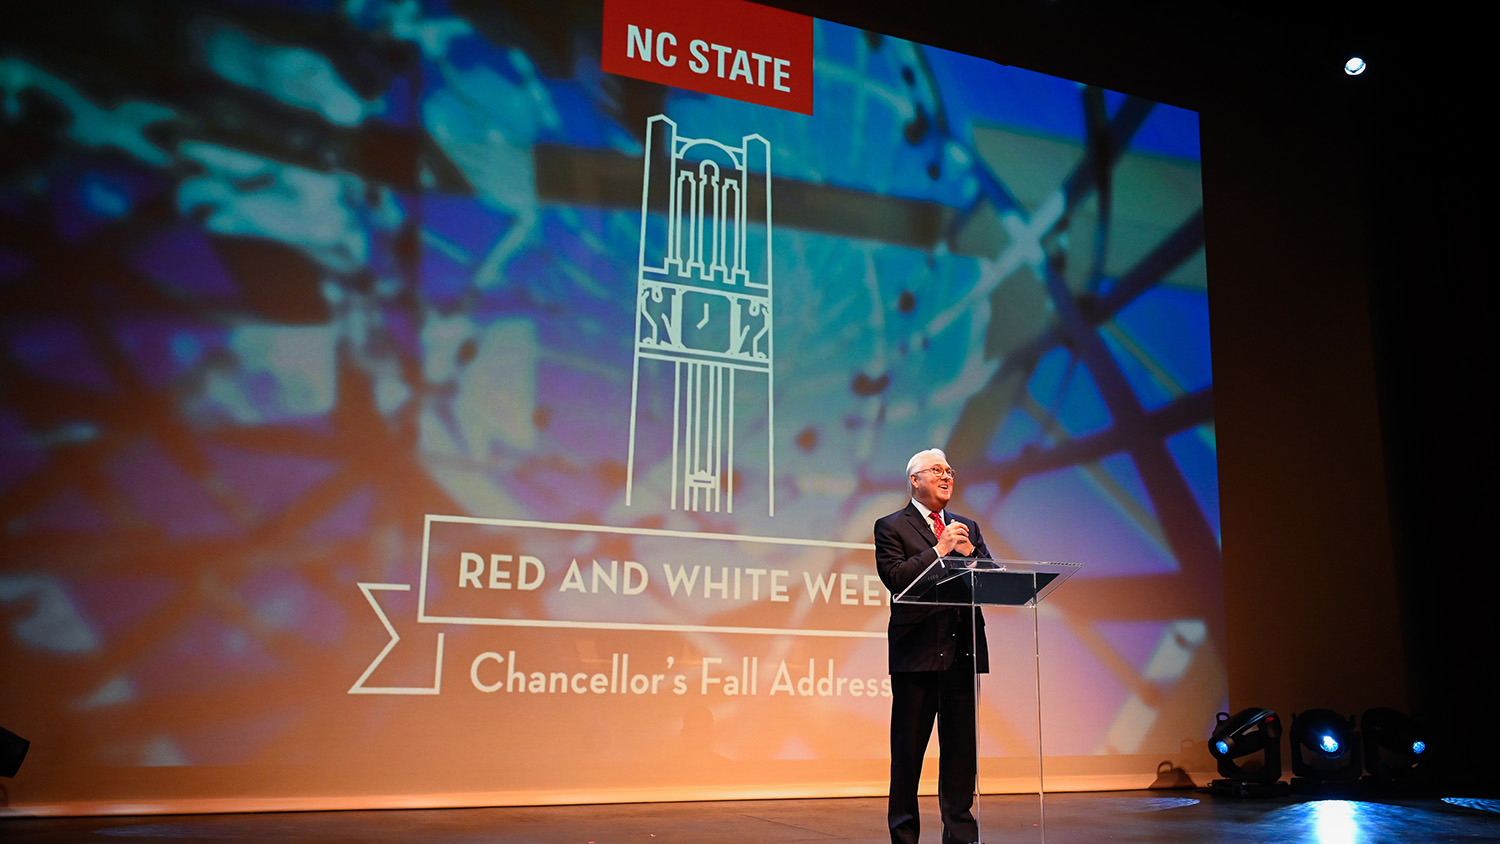 Chancellor Woodson addressing the NC State community at the Chancellor's fall address